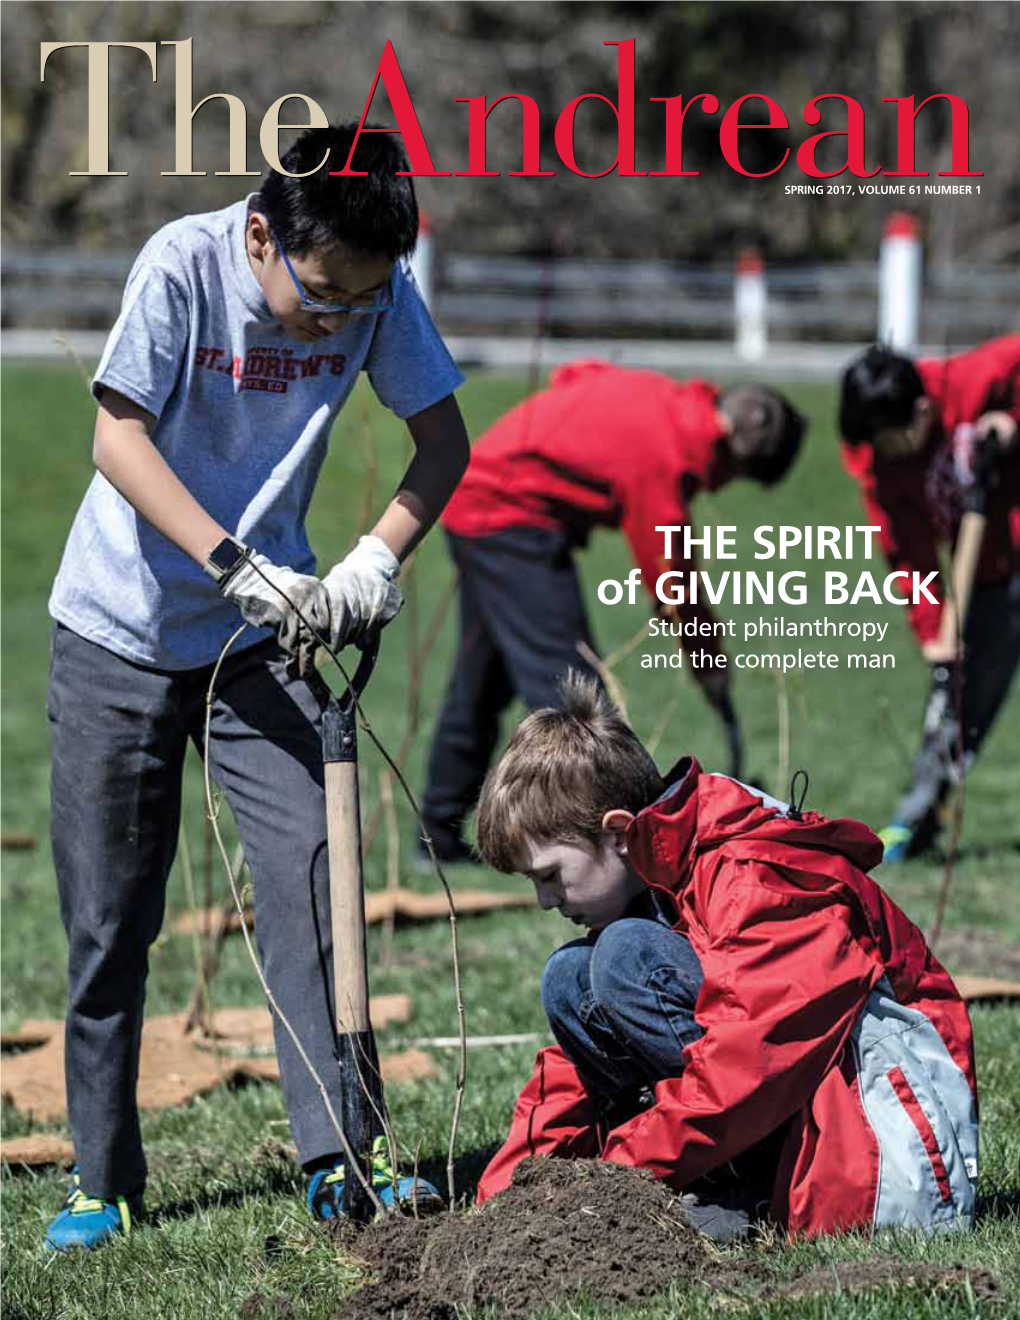 The Spirit of Giving Back Student Philanthropy and the Complete Man Contents